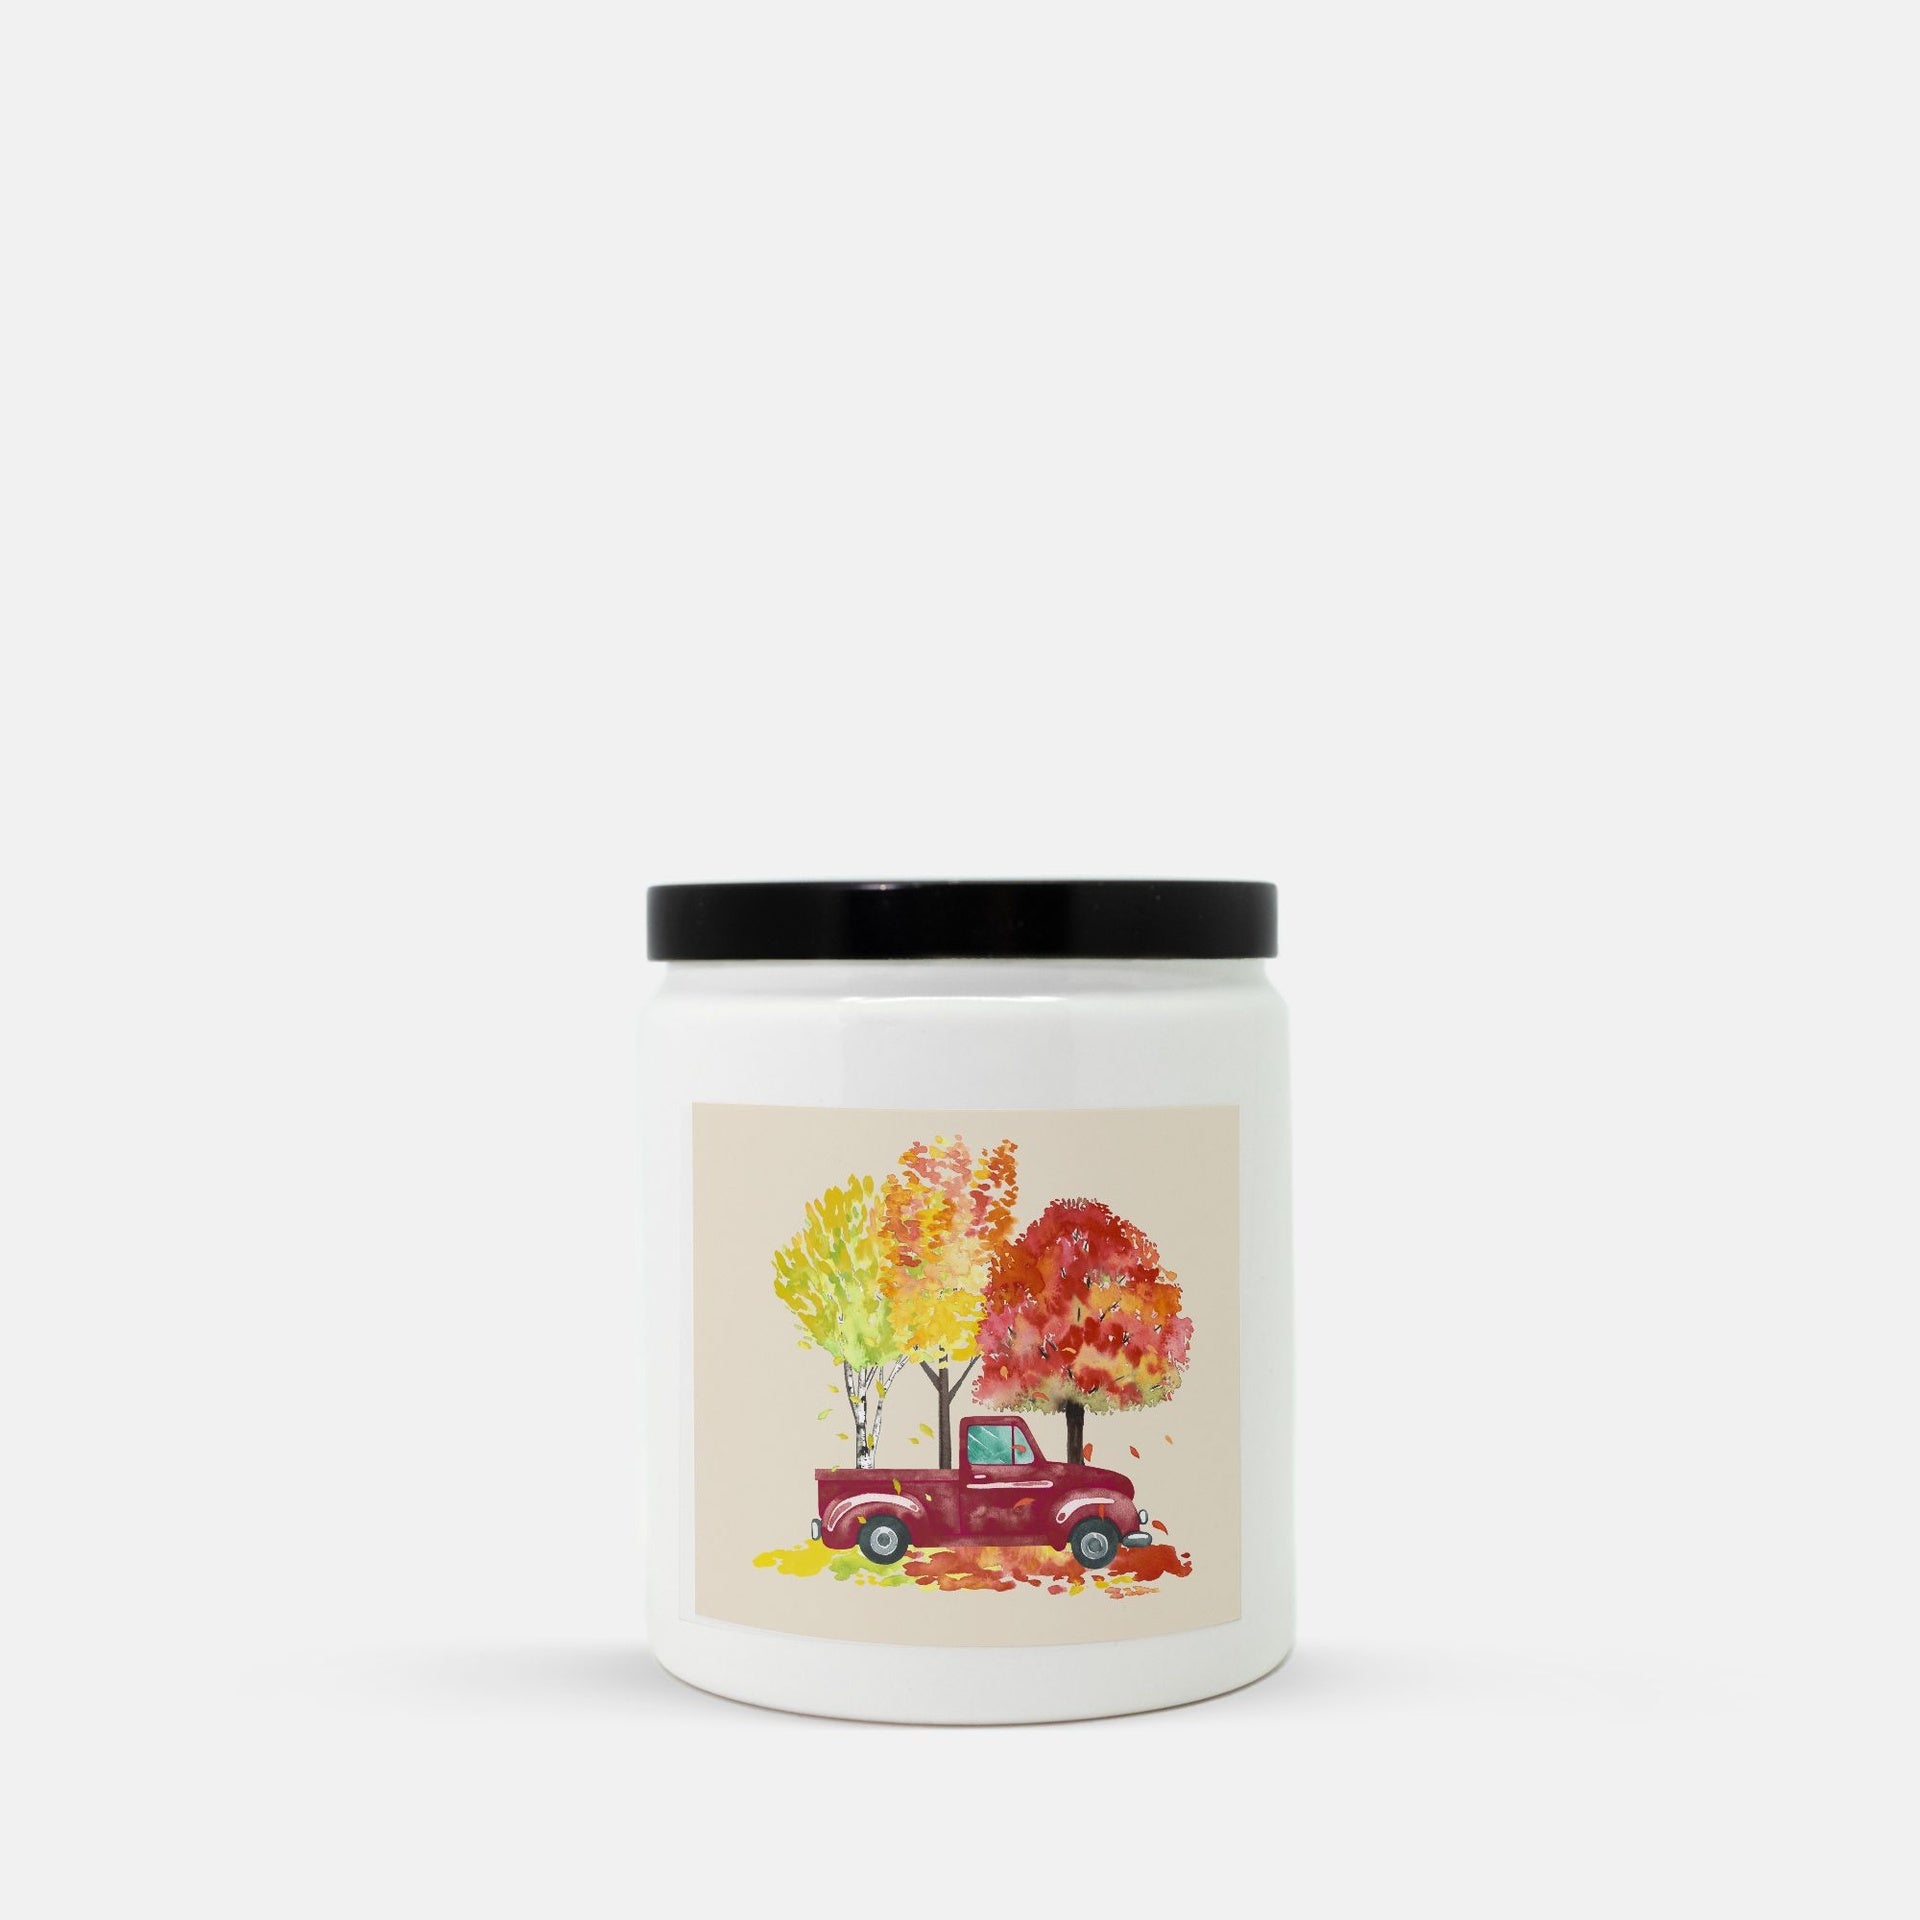 Lifestyle Details - Red Rustic Truck & Trees Ceramic Candle w Black Lid - Macintosh